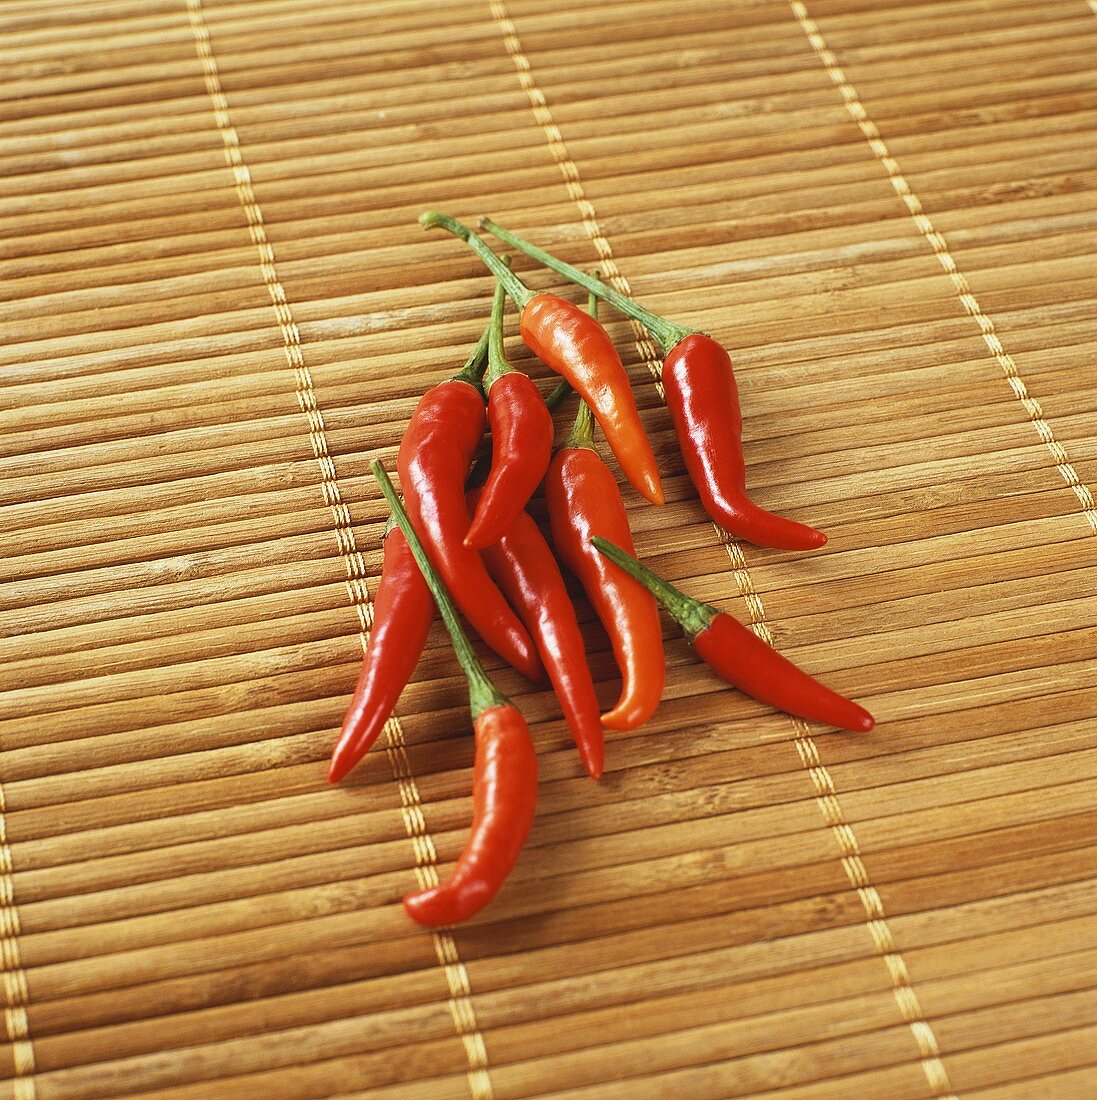 Fresh red chili peppers on bamboo mat